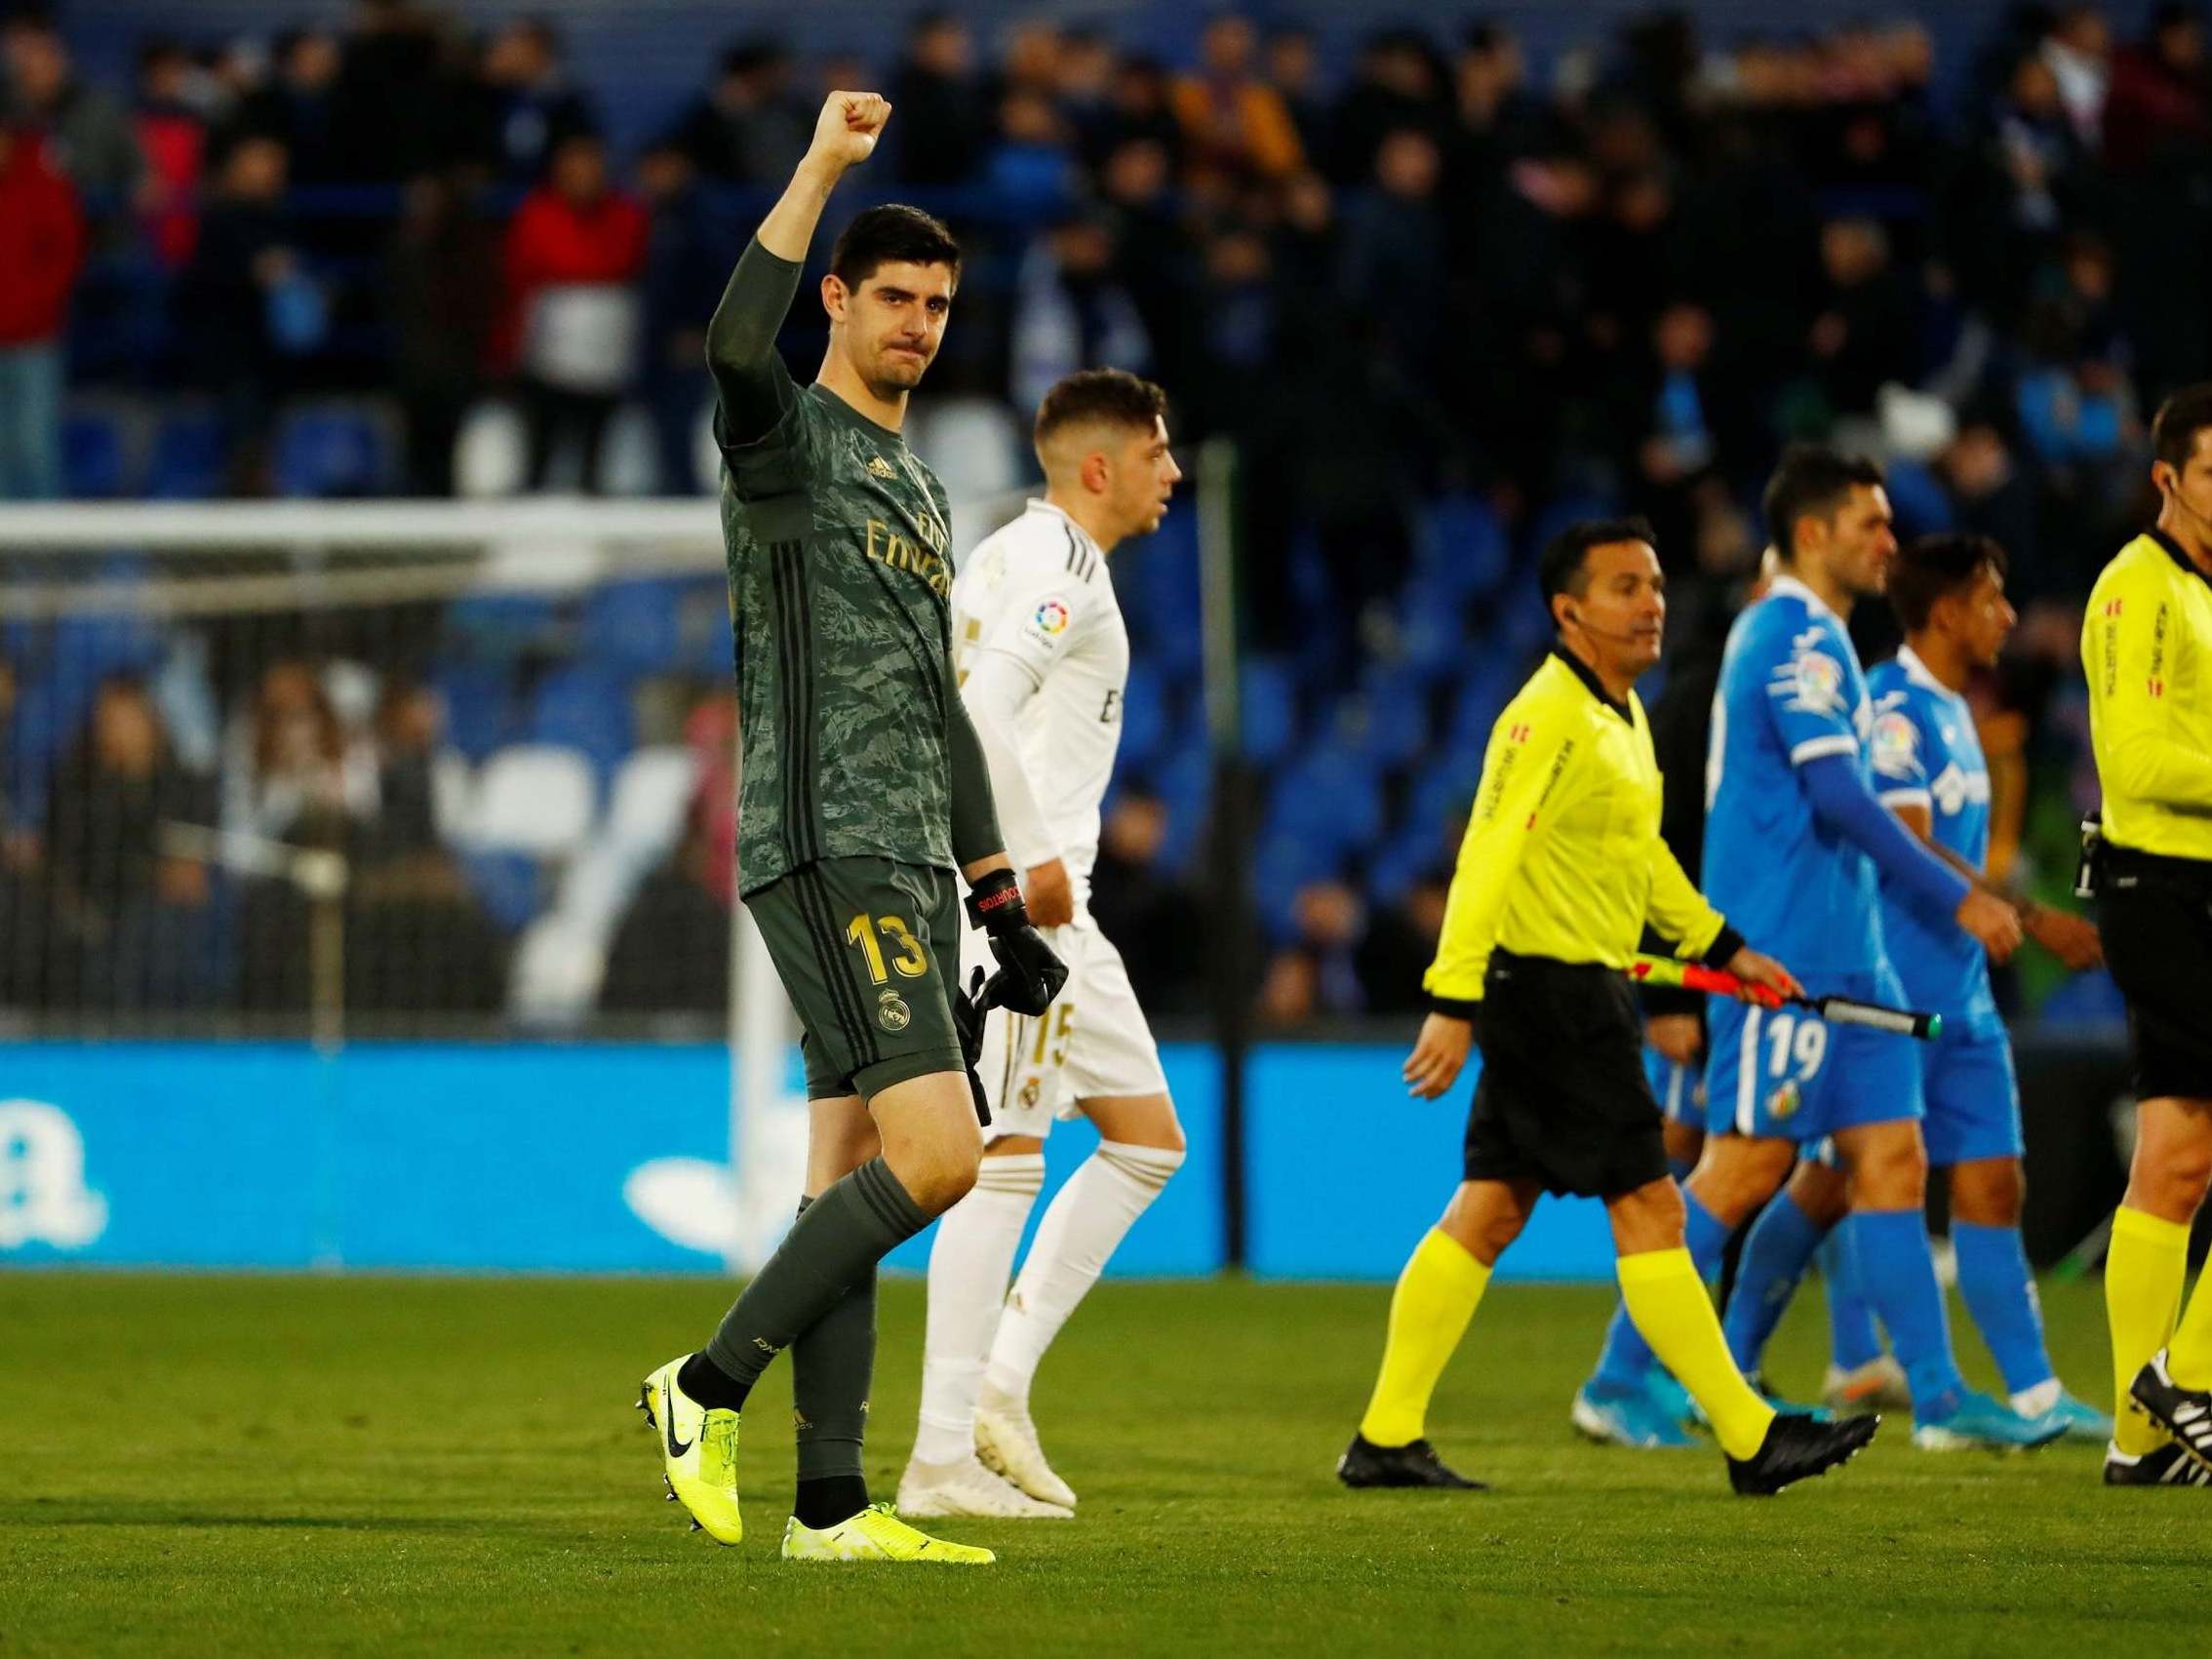 Thibaut Courtois starred as Real Madrid beat Getafe